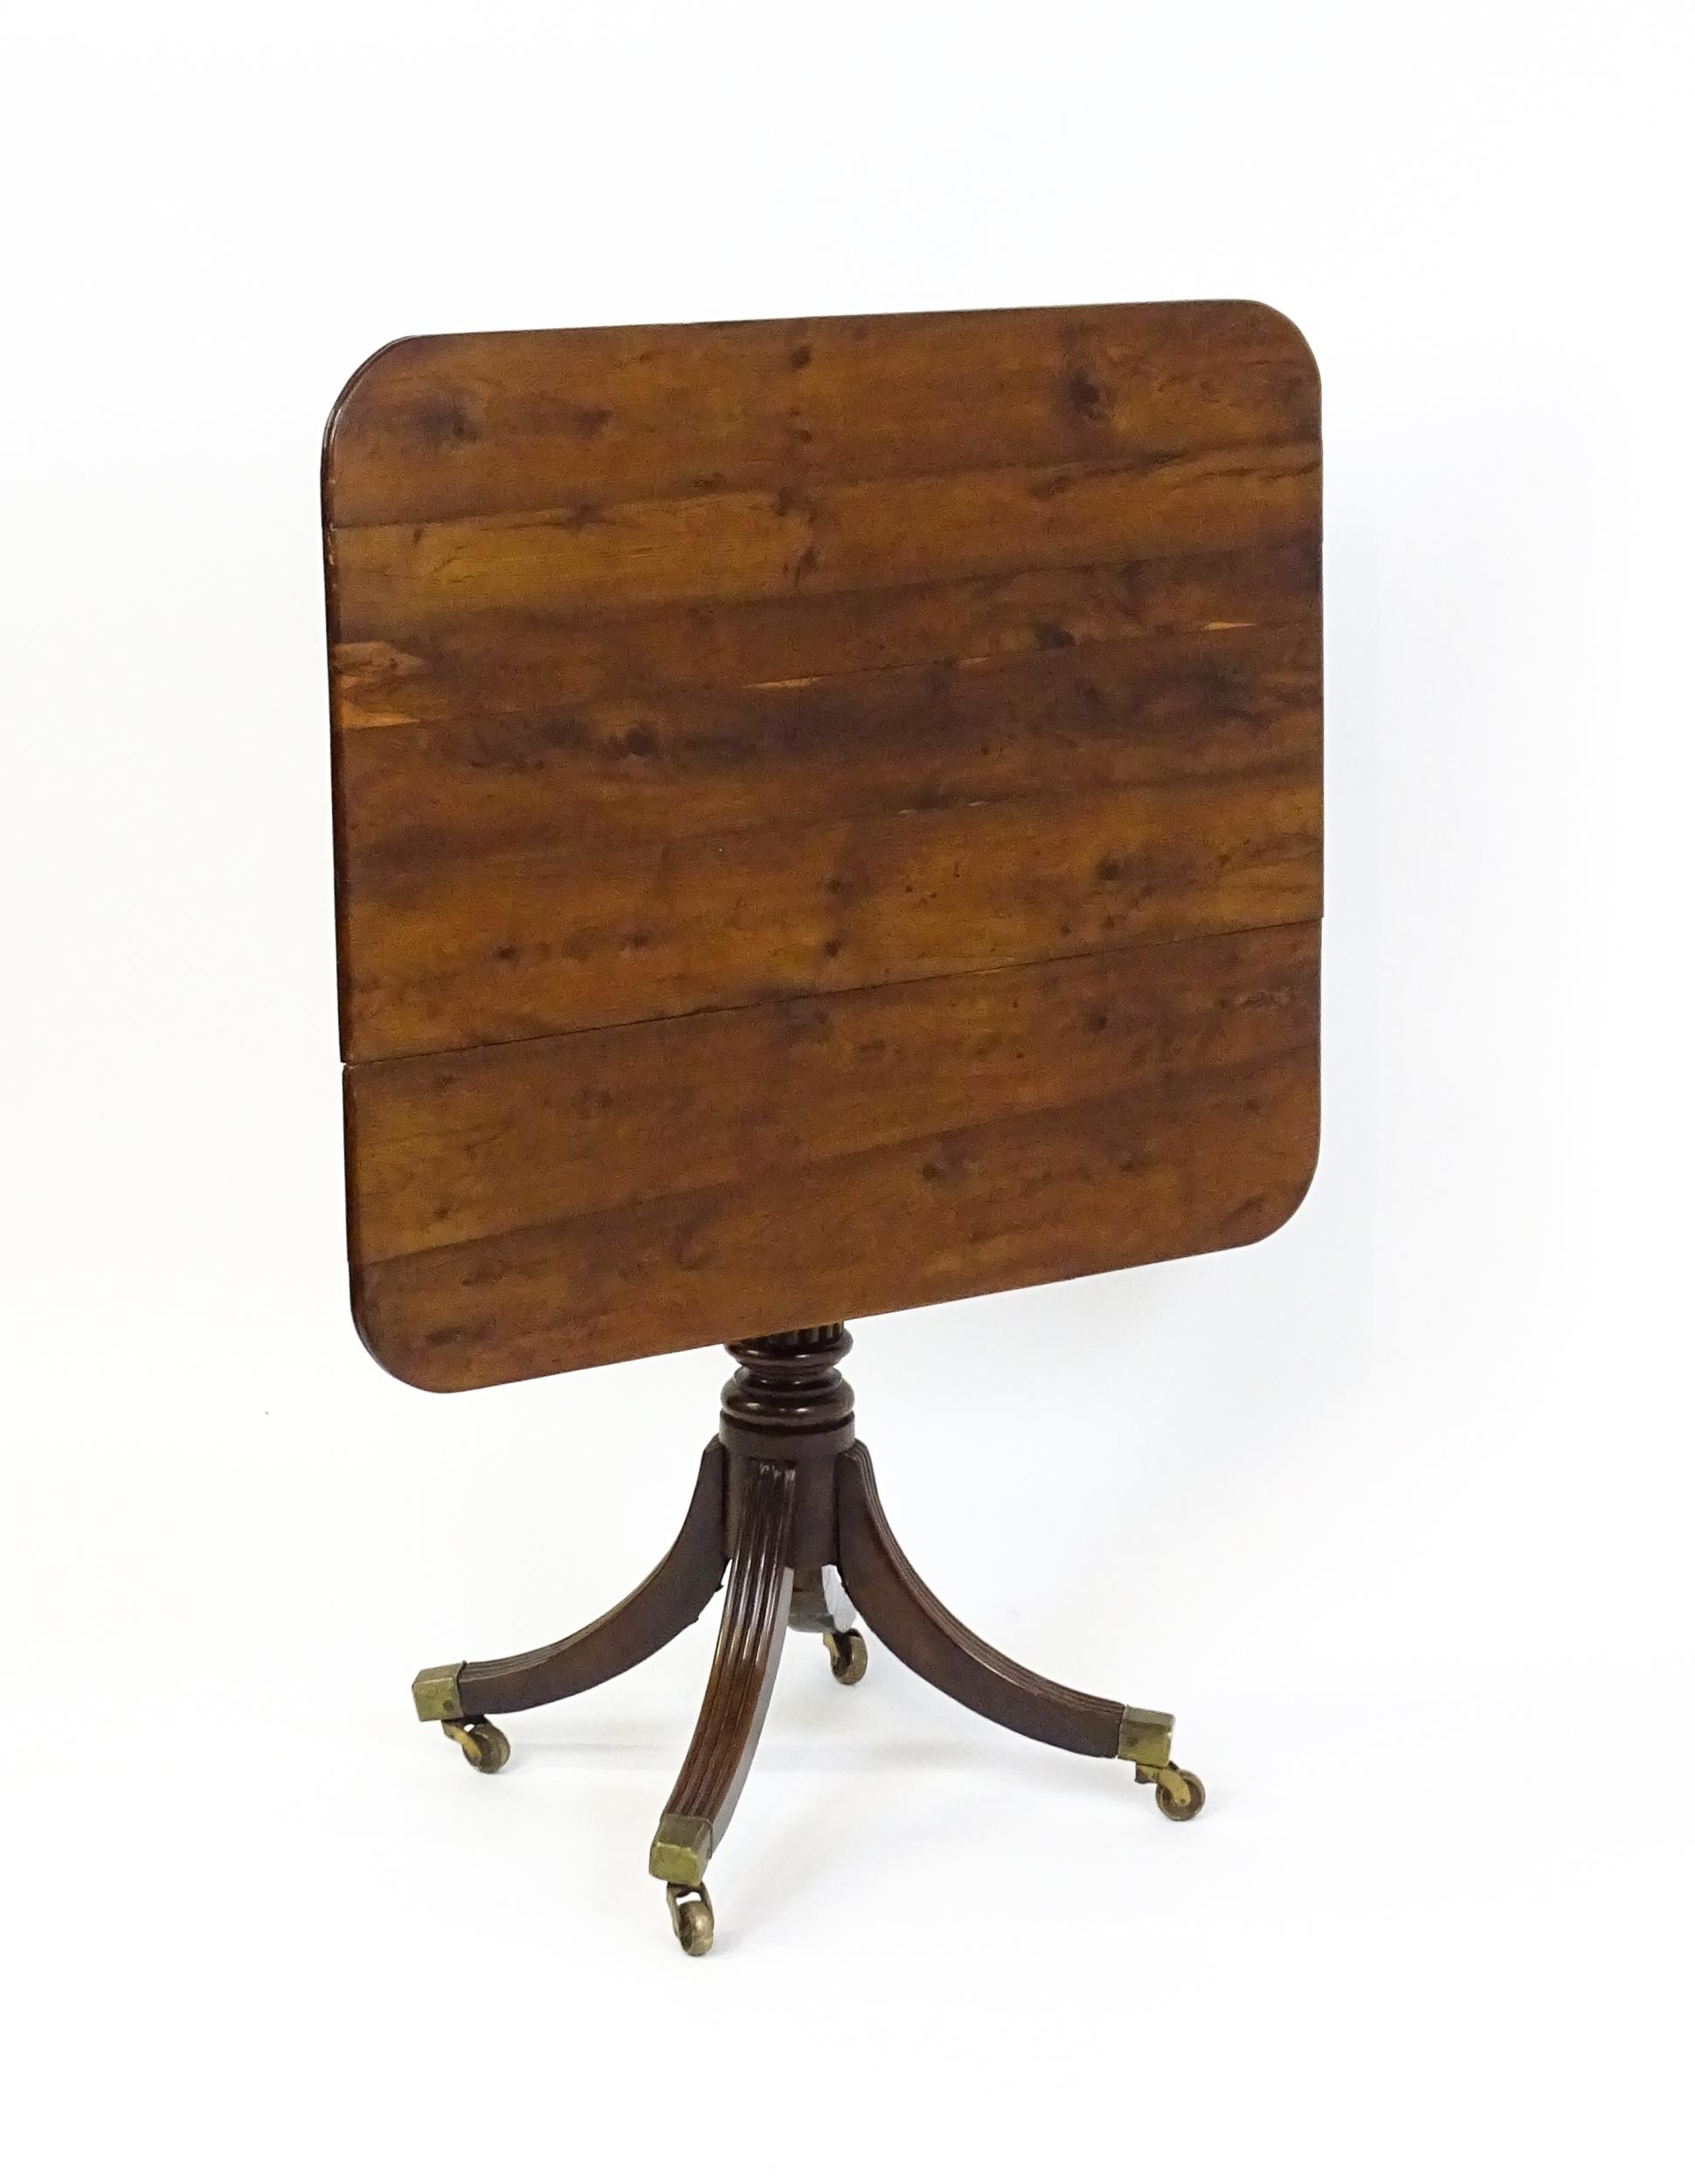 A 19thC tilt top occasional table with yew wood planked top above a reeded mahogany pedestal and